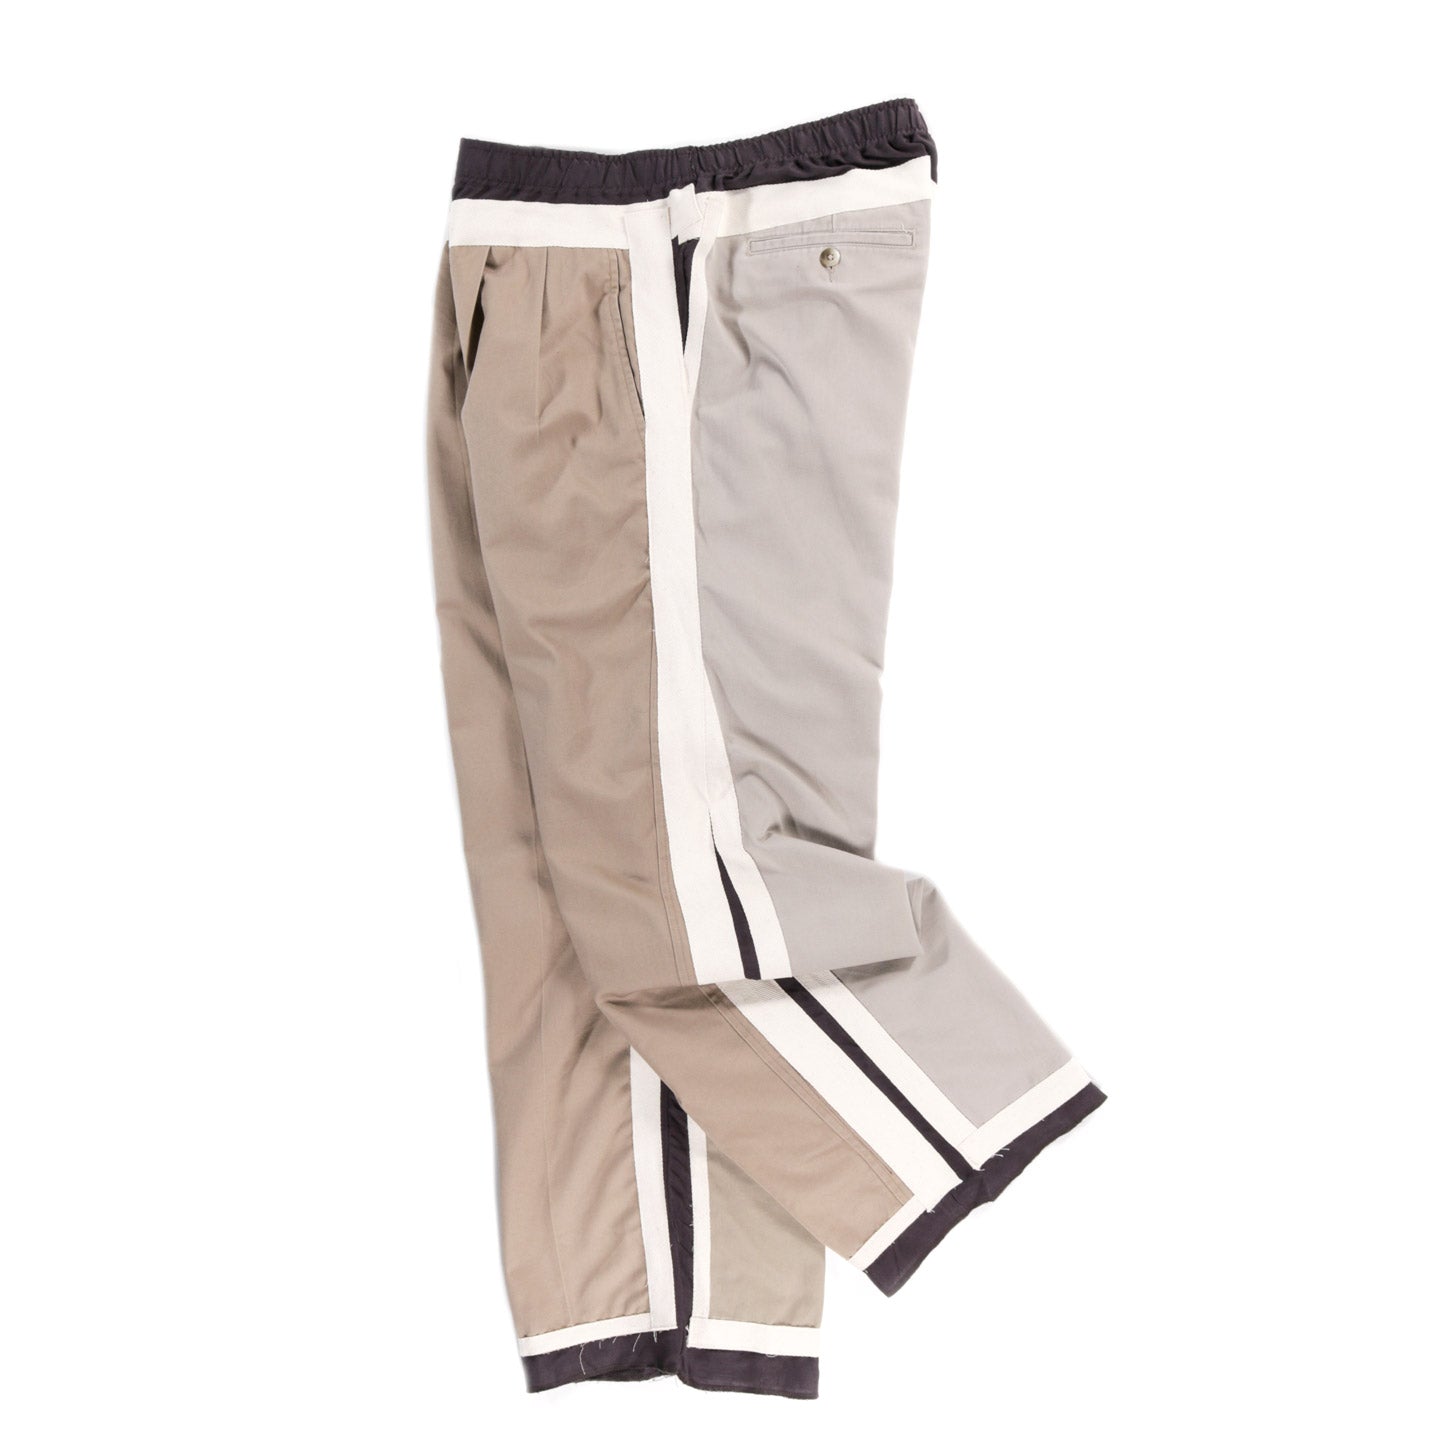 REBUILD BY NEEDLES CHINO COVERED PANT CHARCOAL - XL (A)